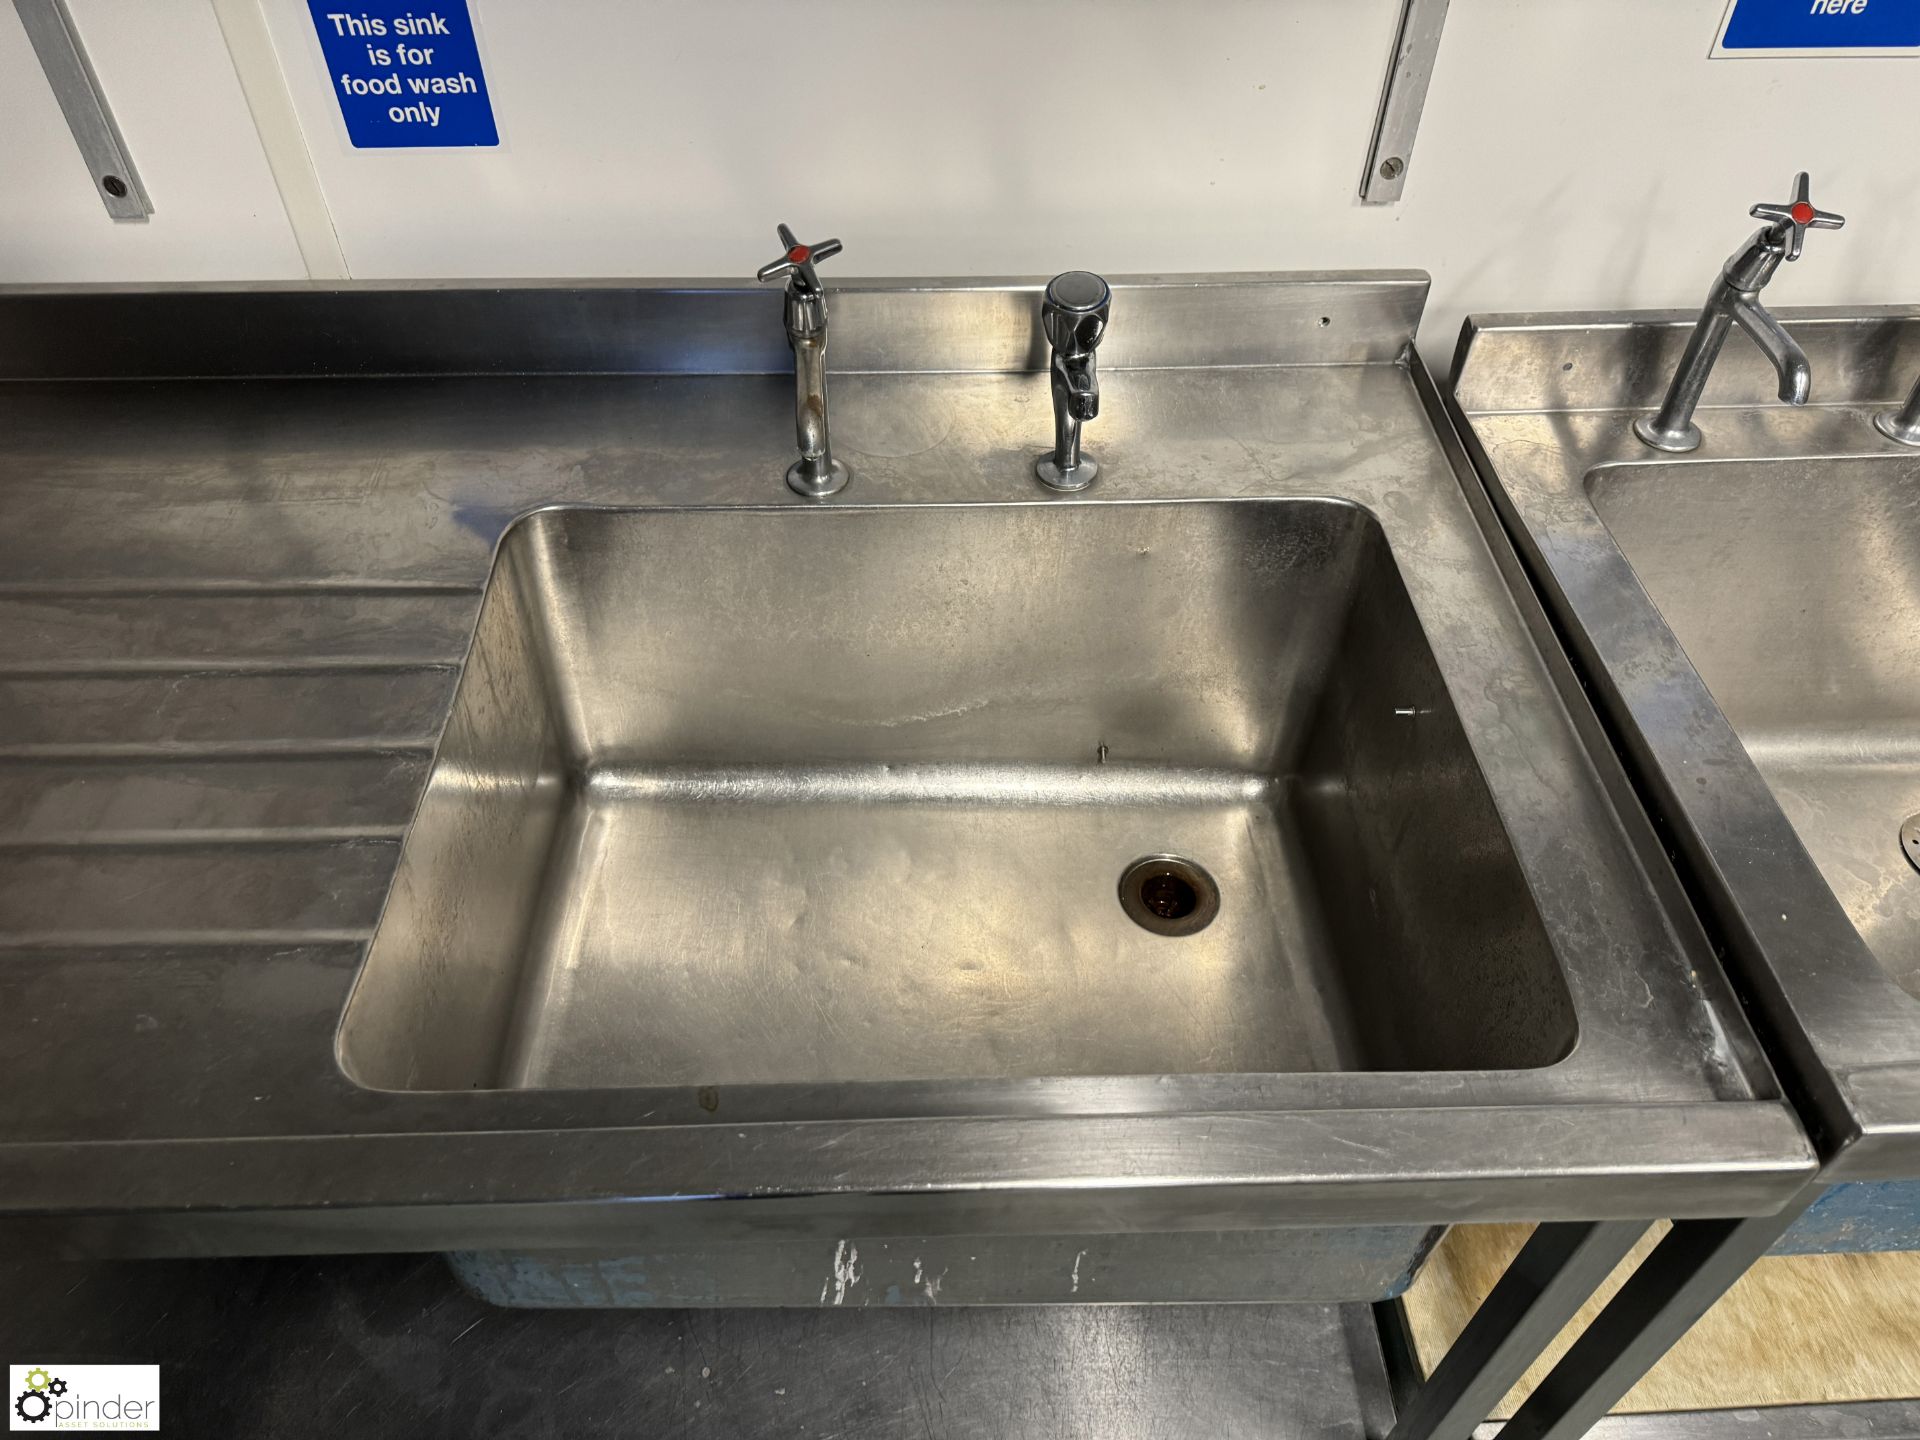 Stainless steel single bowl Sink, 1500mm x 700mm x 880mm (location in building - level 23 kitchen) - Image 3 of 4